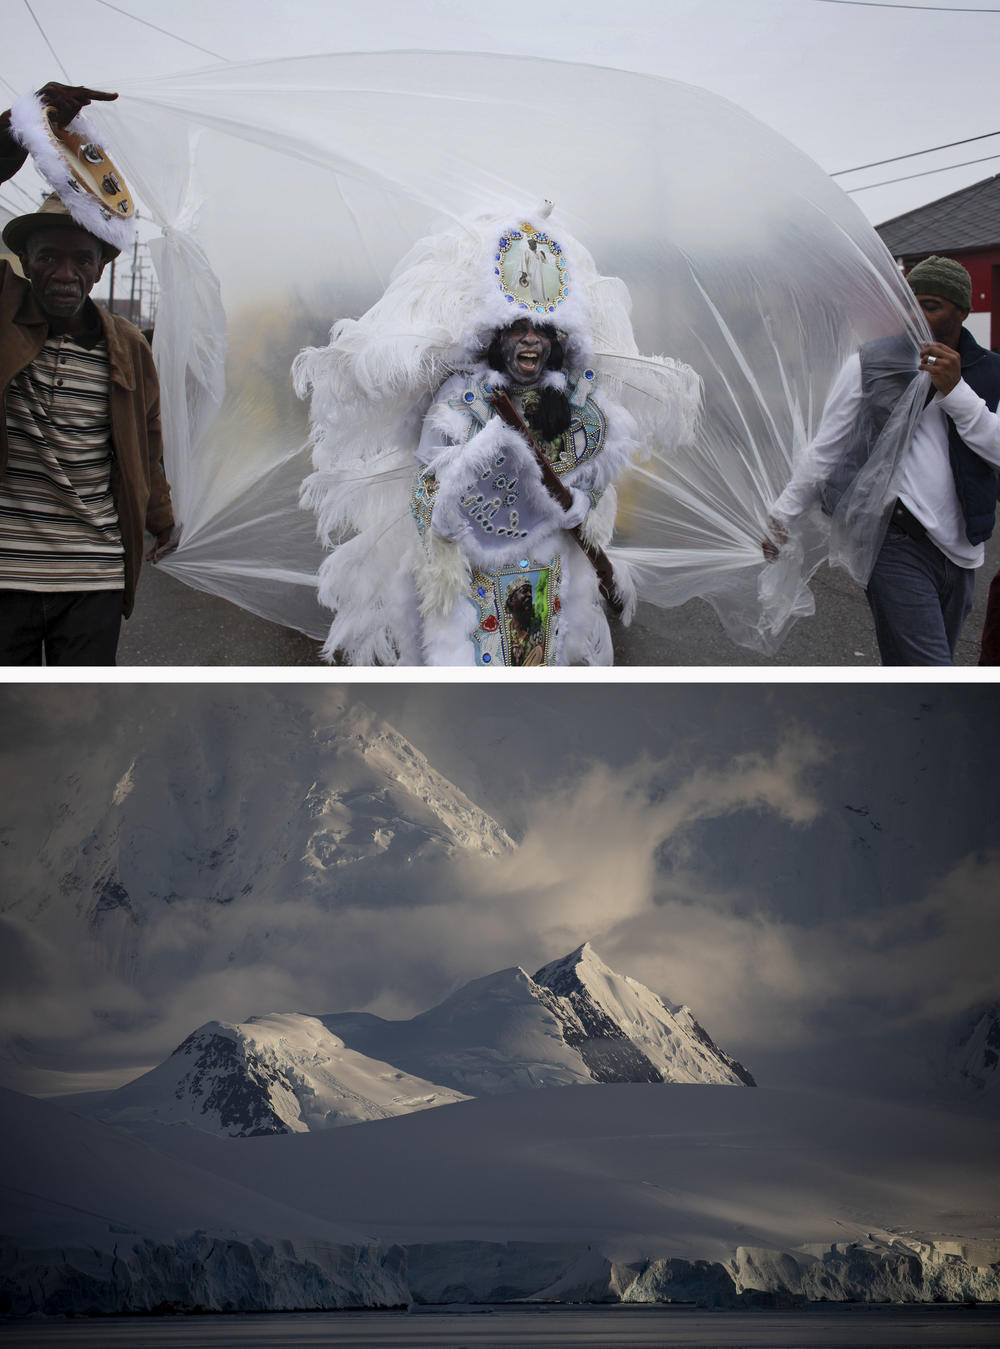 (Top image) Spyboy Al Polite of the Mardi Gras Indian tribe Fi Yi Yi walks through the streets of downtown New Orleans on Carnival Day, February 2013. (Bottom image) A view of the glaciers and mountains from the Gerlache Strait on the western side of the Antarctic Peninsula in February 2022.